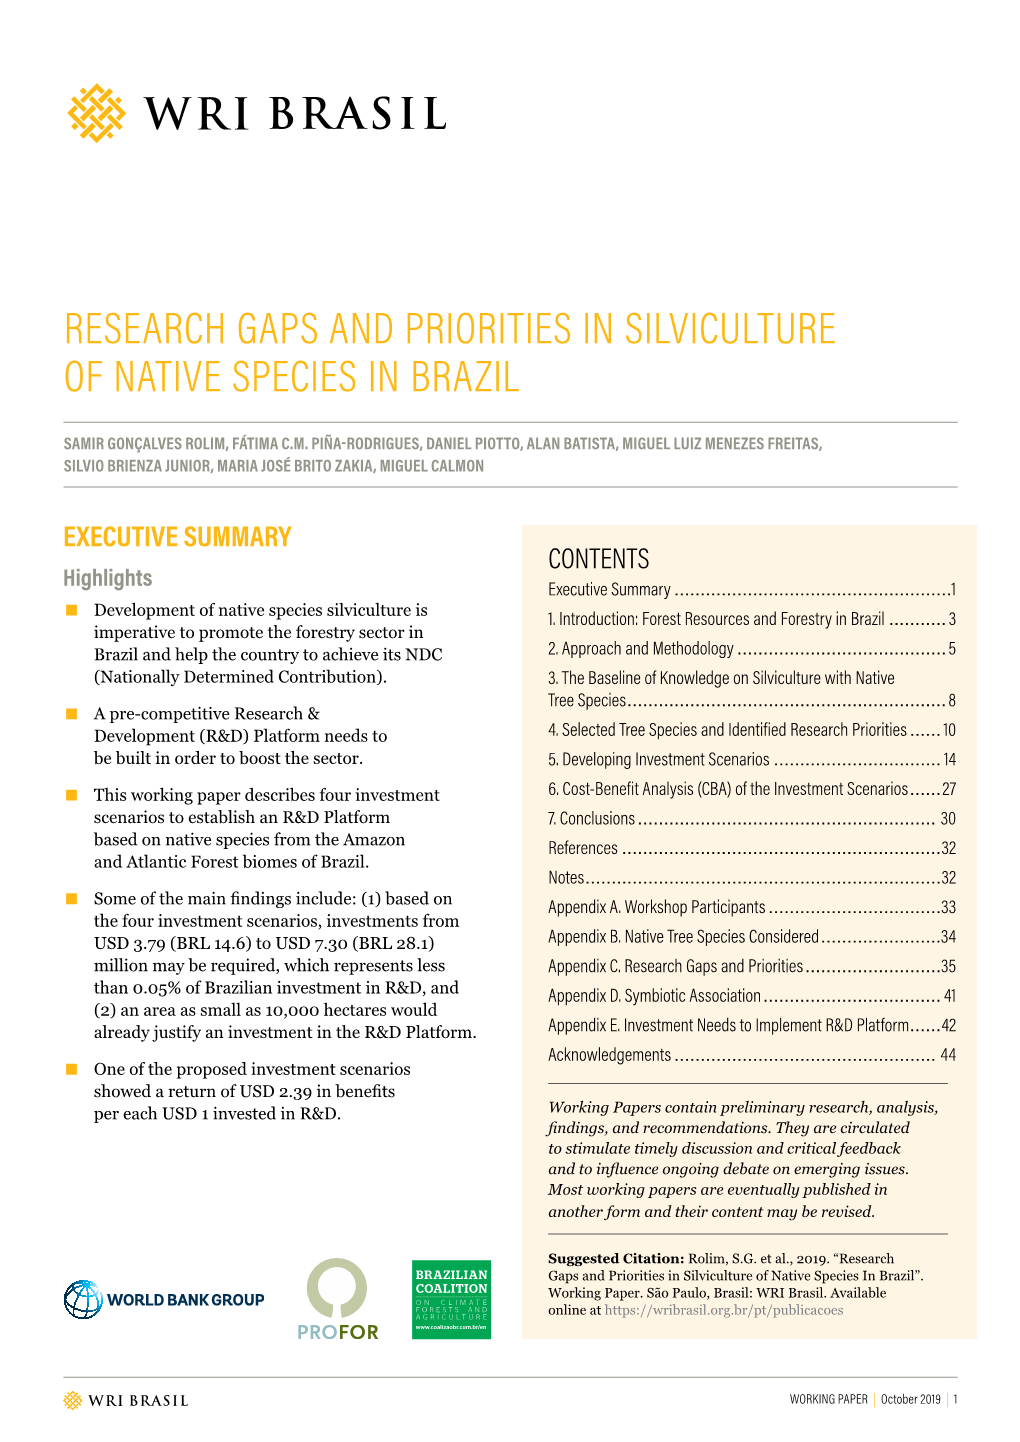 Research Gaps and Priorities in Silviculture of Native Species in Brazil